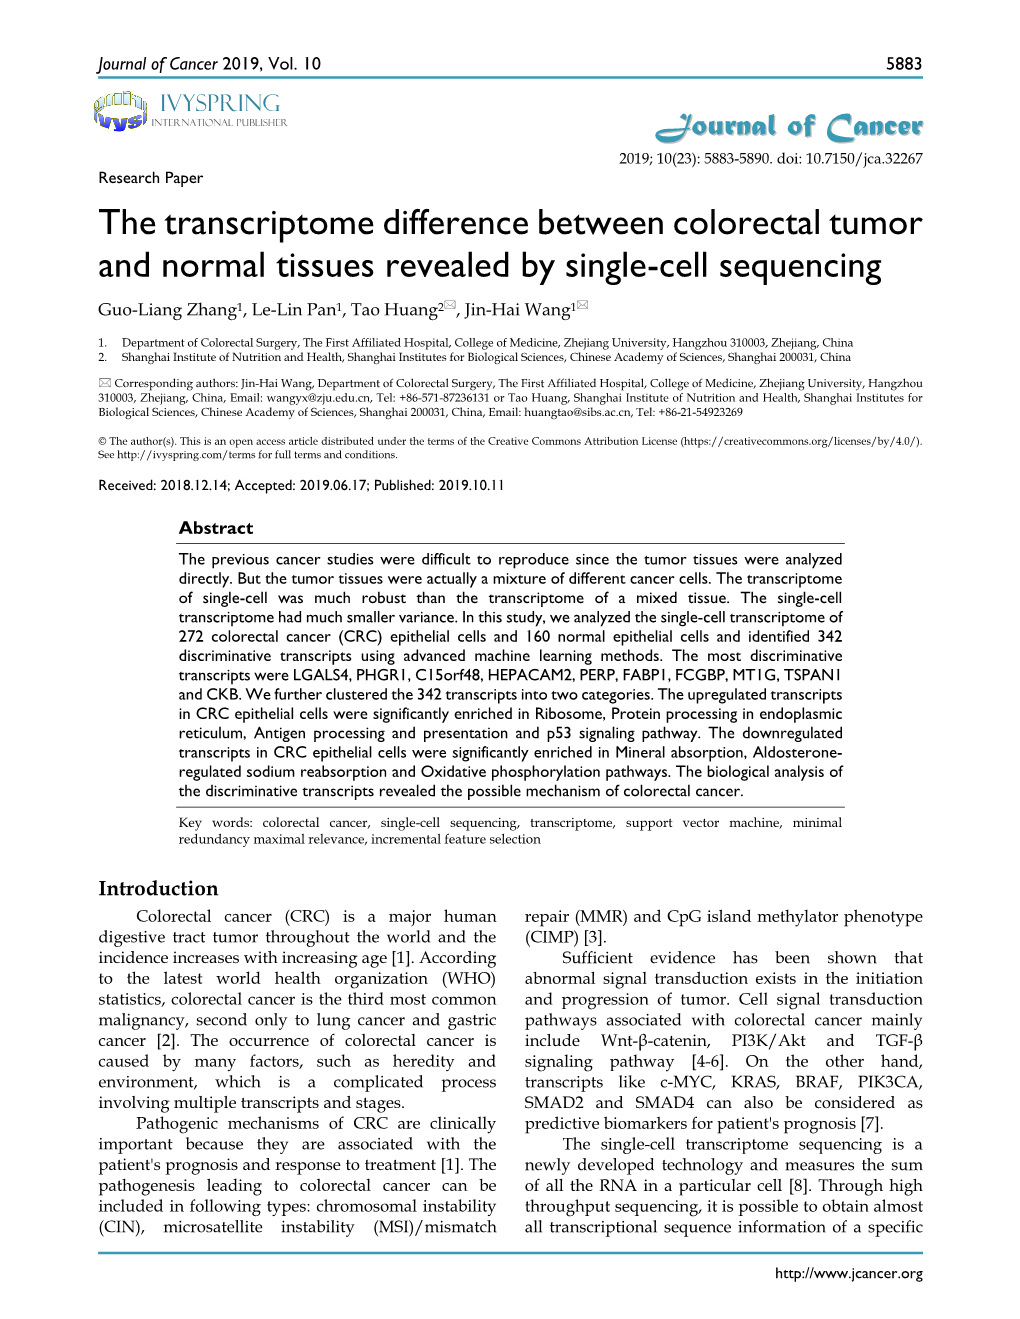 The Transcriptome Difference Between Colorectal Tumor and Normal Tissues Revealed by Single-Cell Sequencing